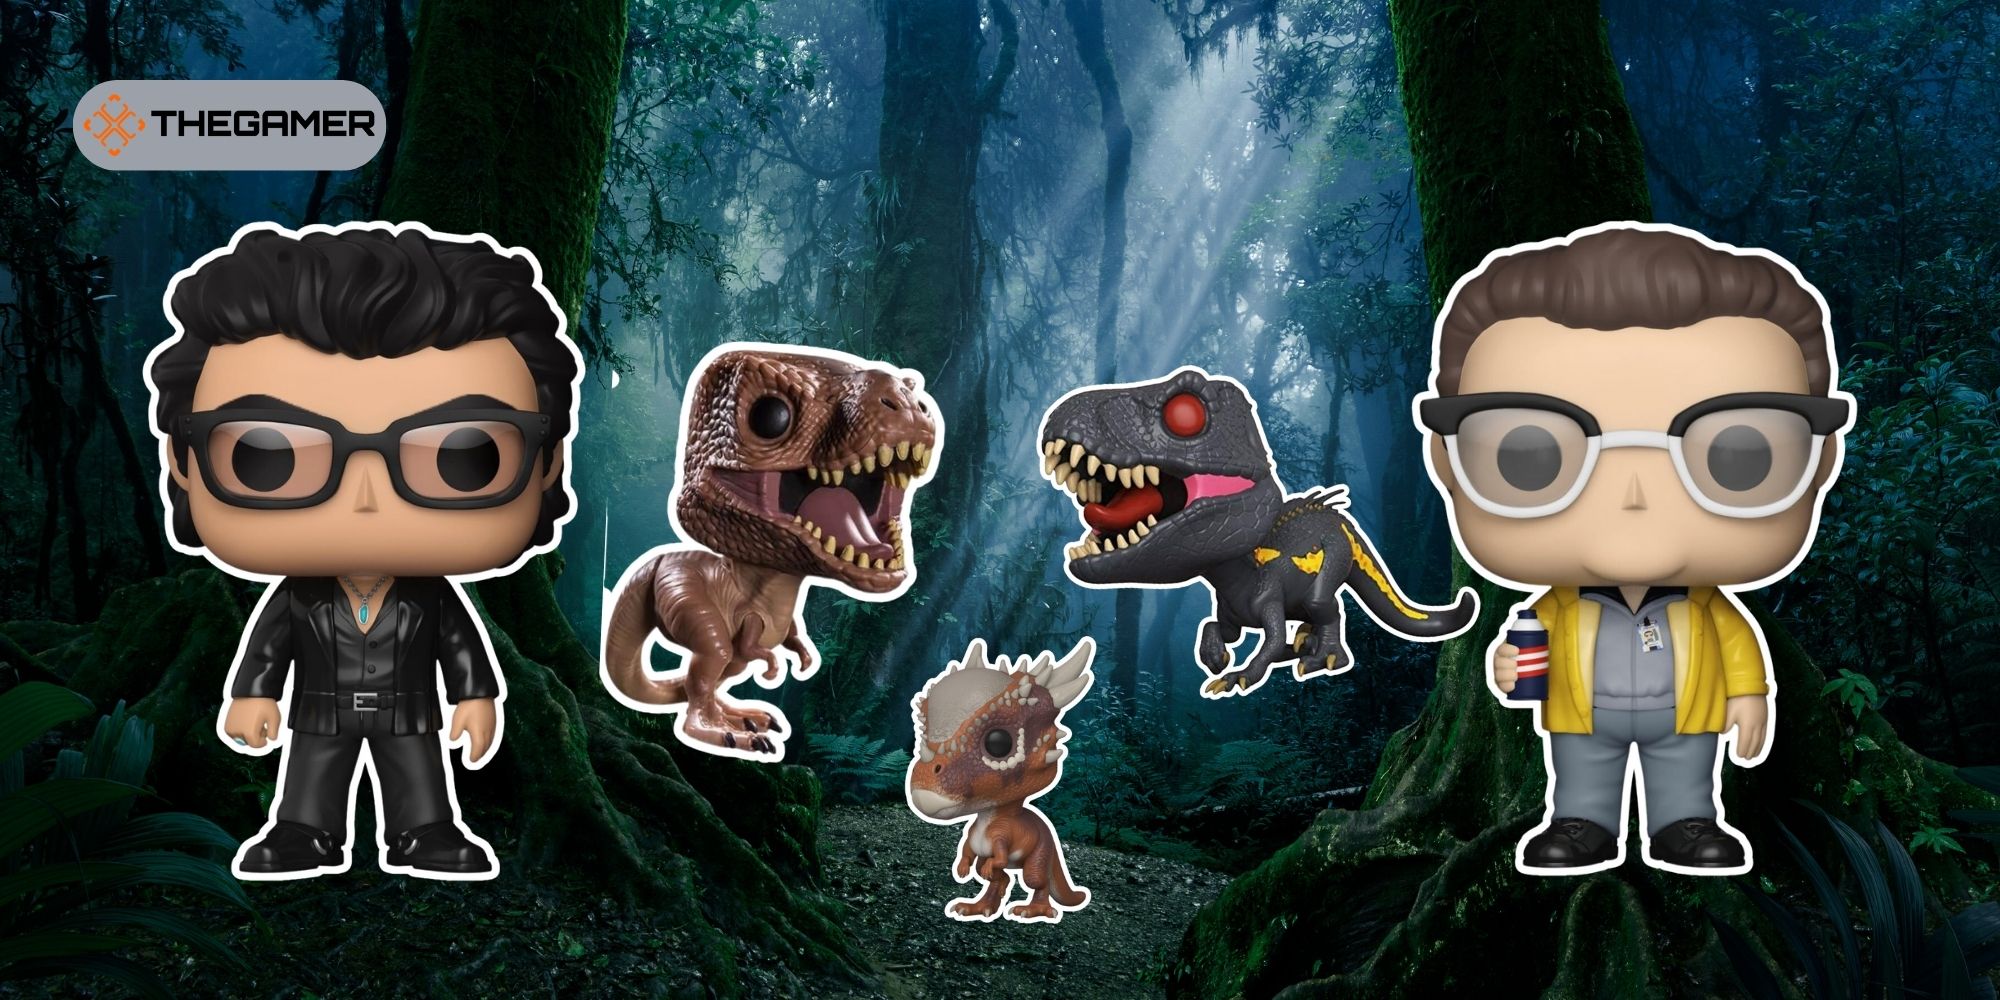 Official Images of the Jurassic Park Funko Pop Line Have Arrived! (Updated  with exclusives)